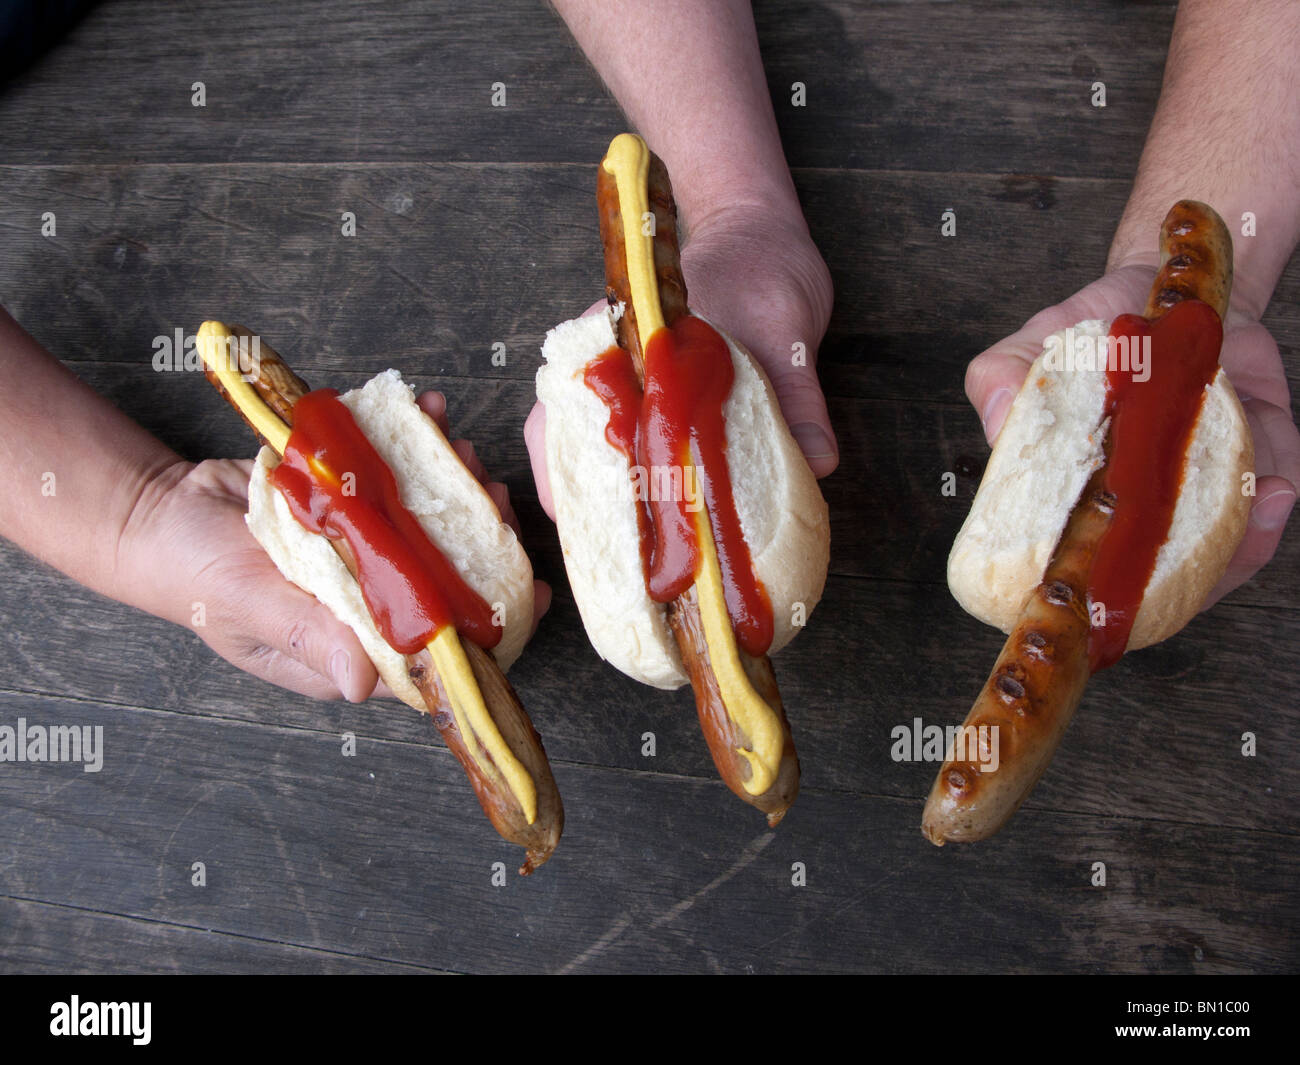 Three traditional bratwurst sausages in Berlin Germany Stock Photo